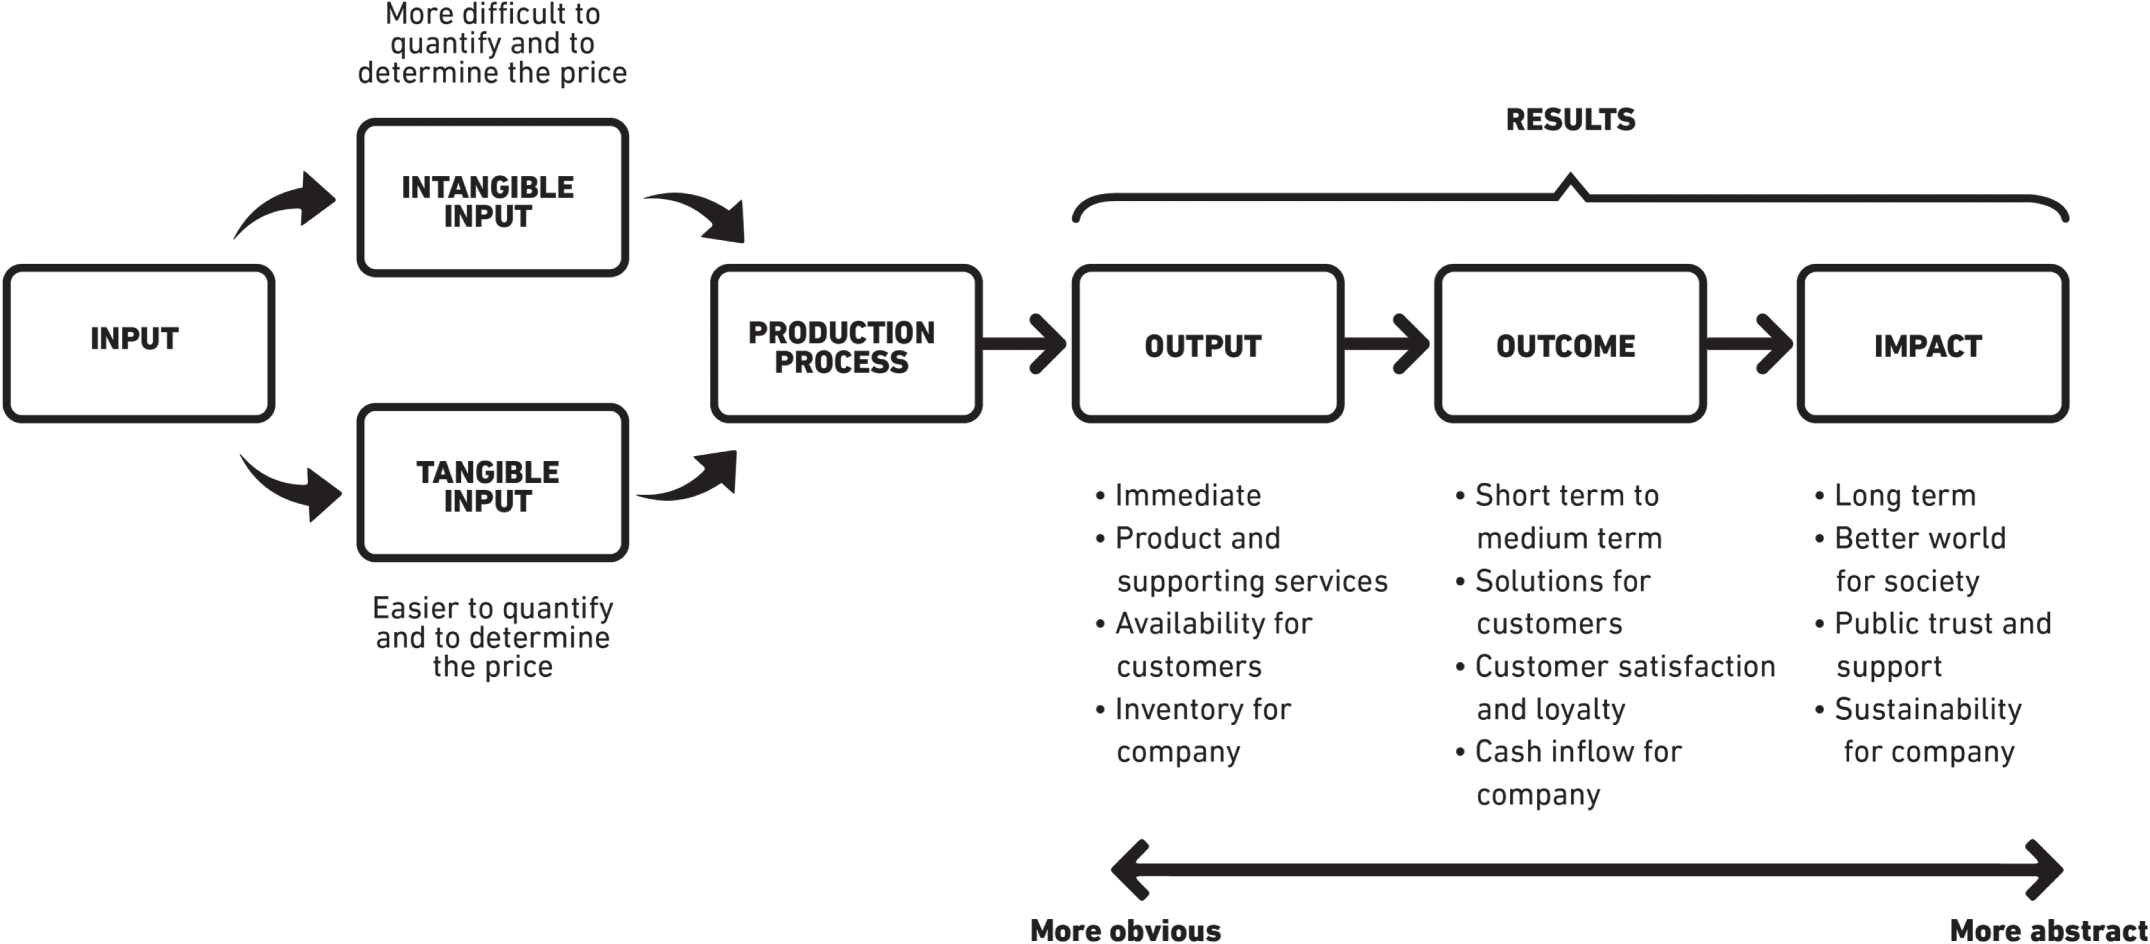 Schematic illustration of from input to impact13.The concept of results consisting of output, outcome, and impact refers to the OECD explanation.